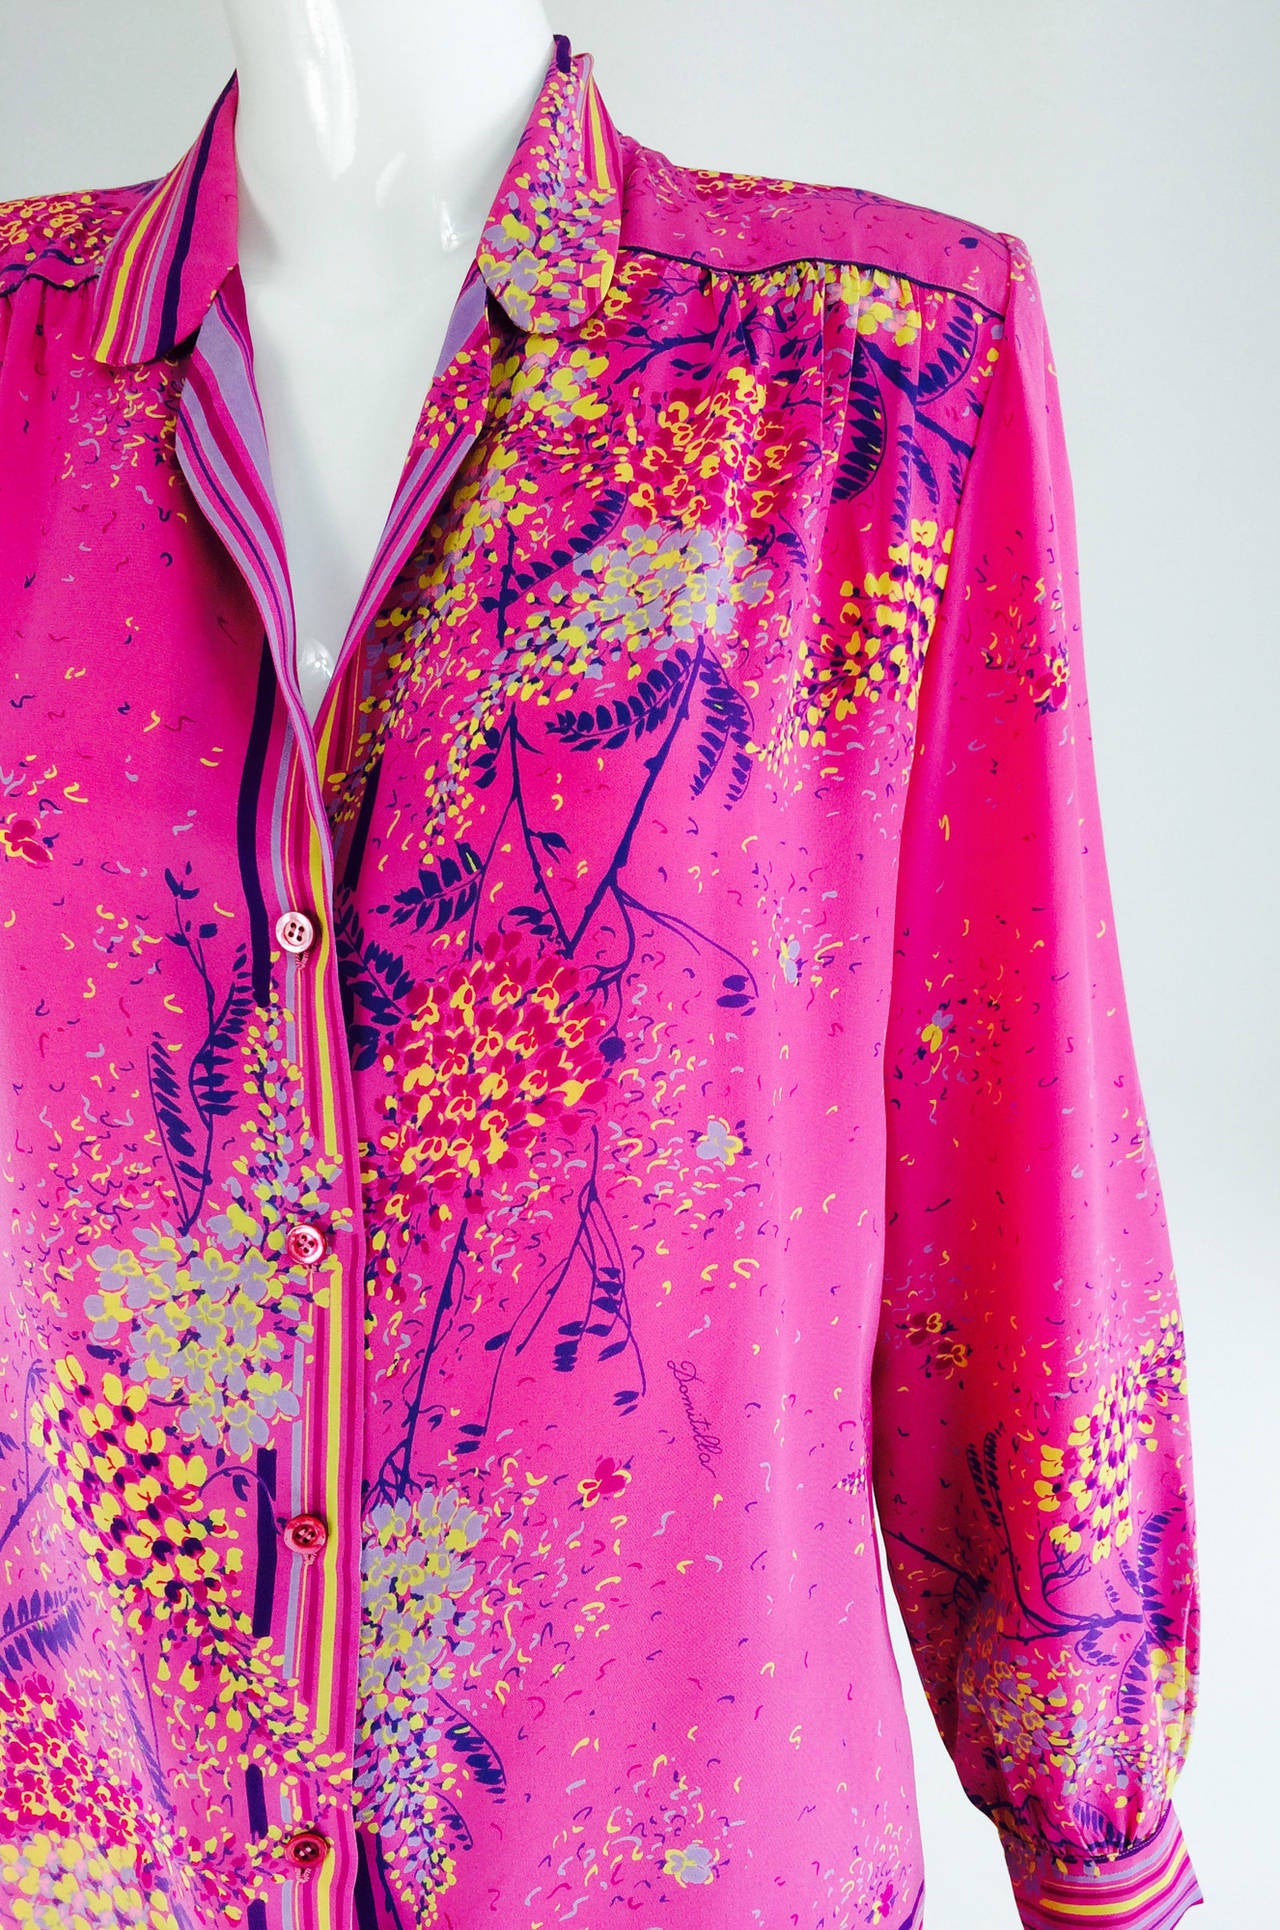 Domitilla is a hard to find label from the 1970s & 80s...Made in Firenze, Italy the dresses were done in silks and silky poly knits in brilliant colours and eye popping prints...From the 1980s a silk print top and skirt...Hot pink silk with a floral